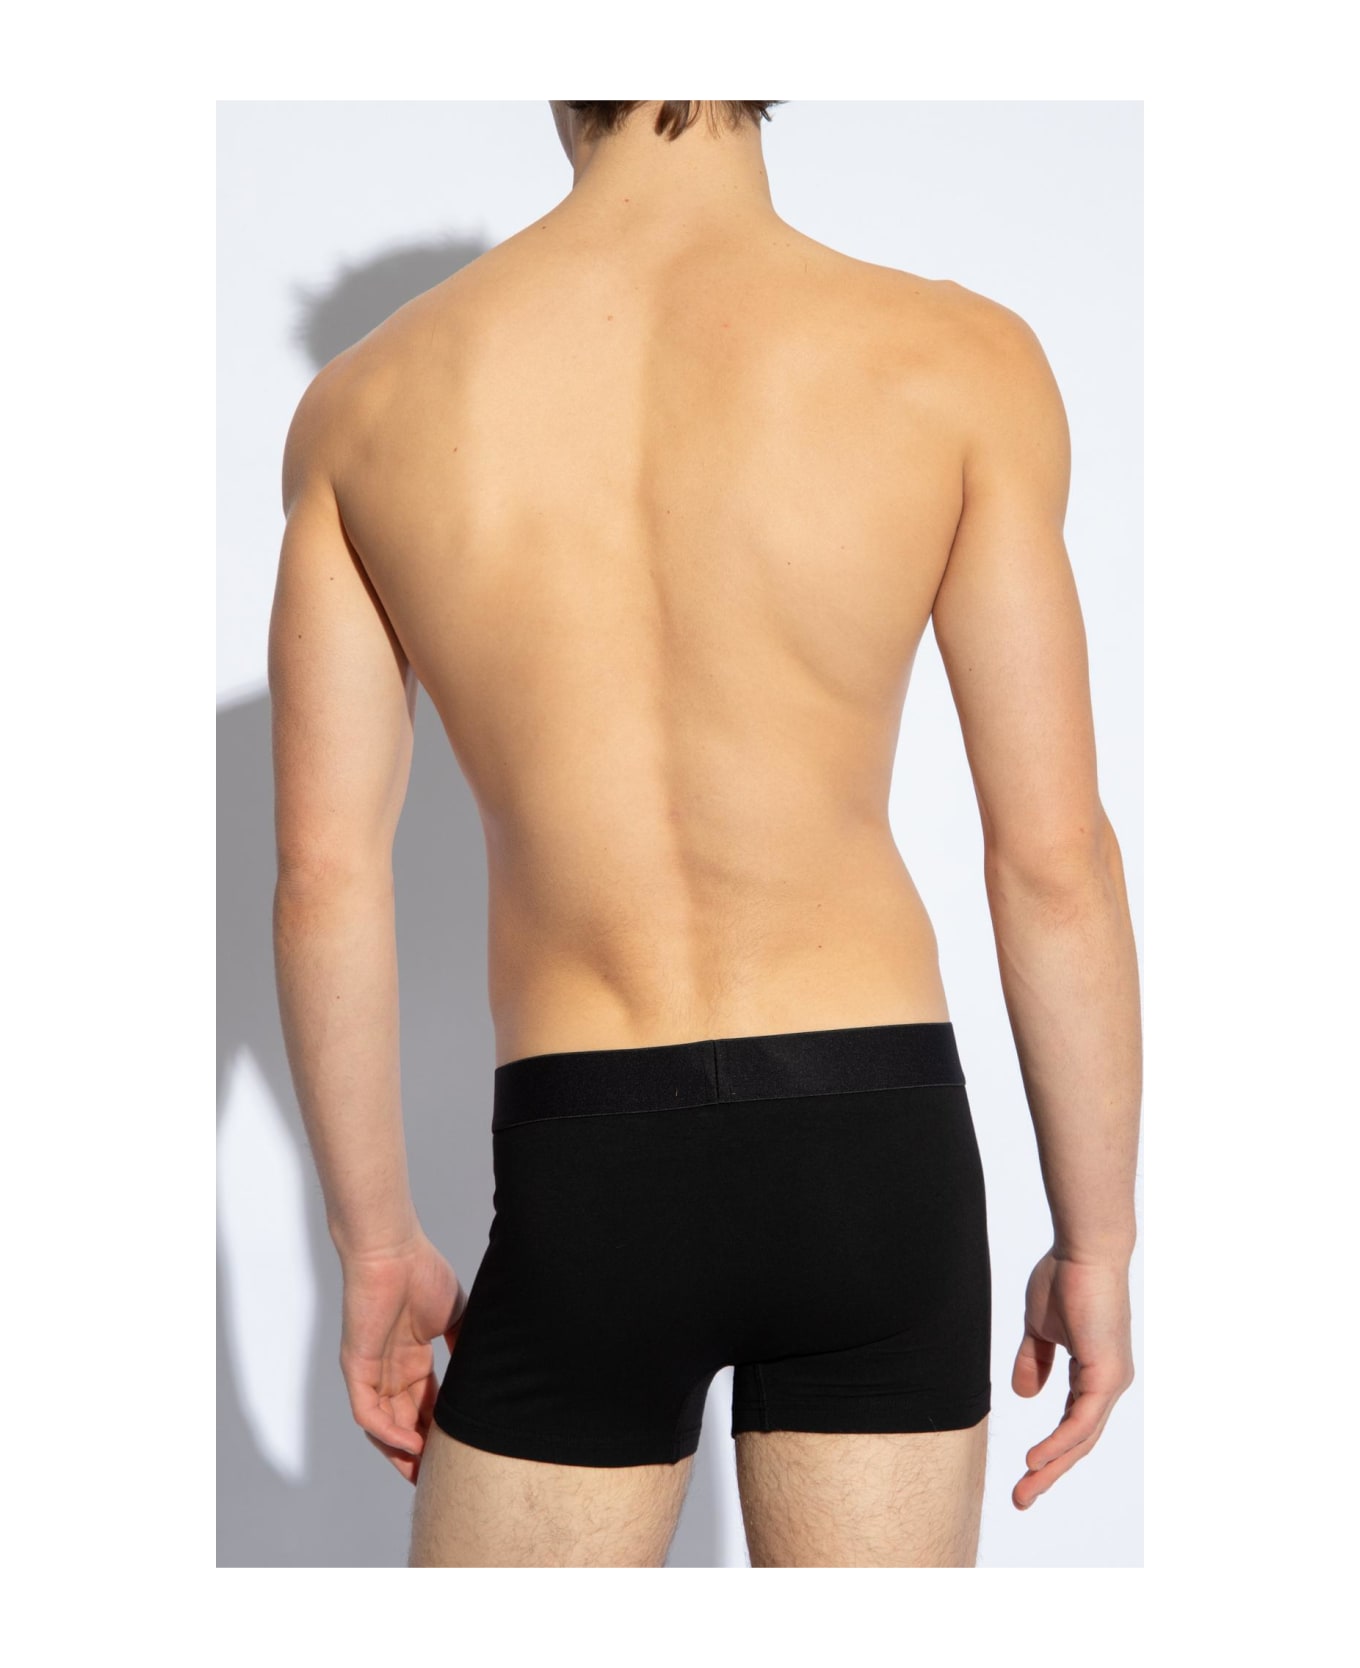 Dsquared2 Boxers With Logo - Black